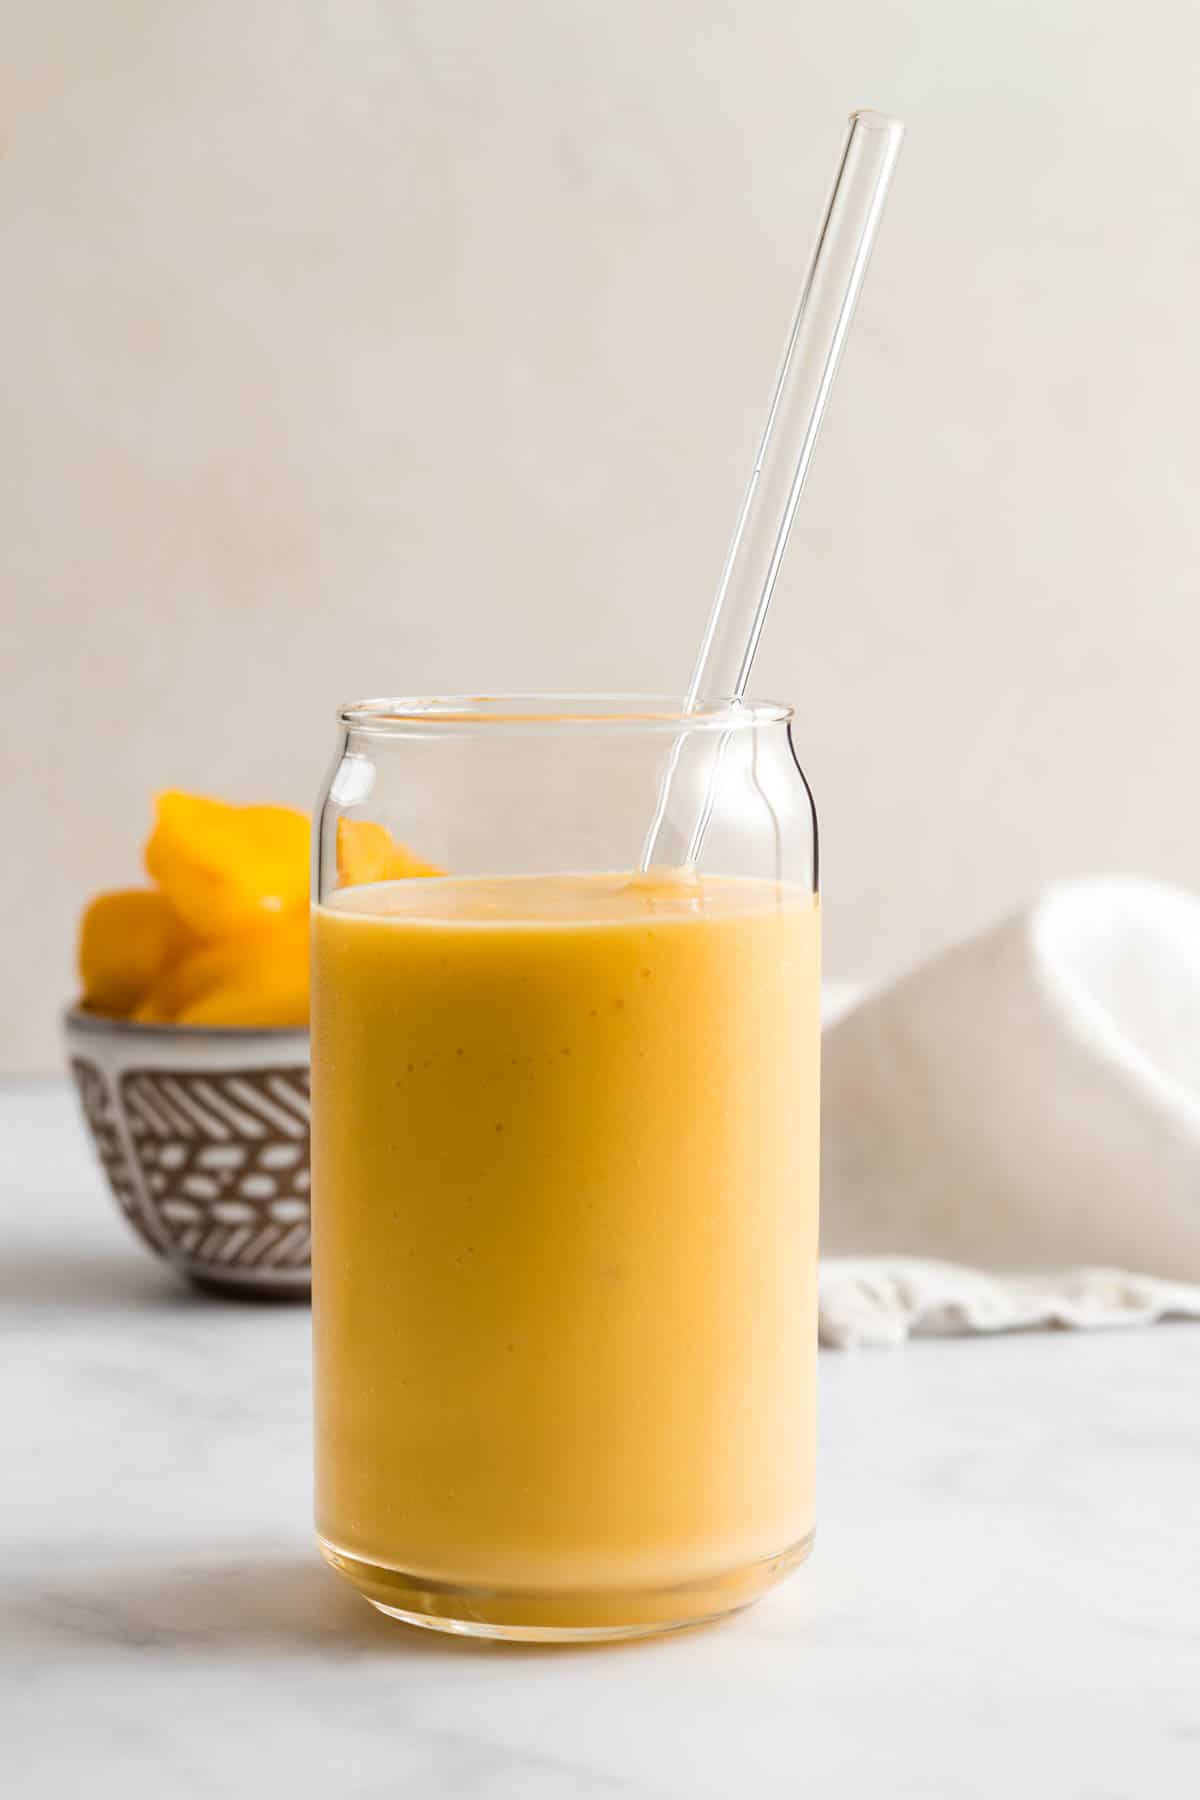 A yellow smoothie in glass cup with glass straw.